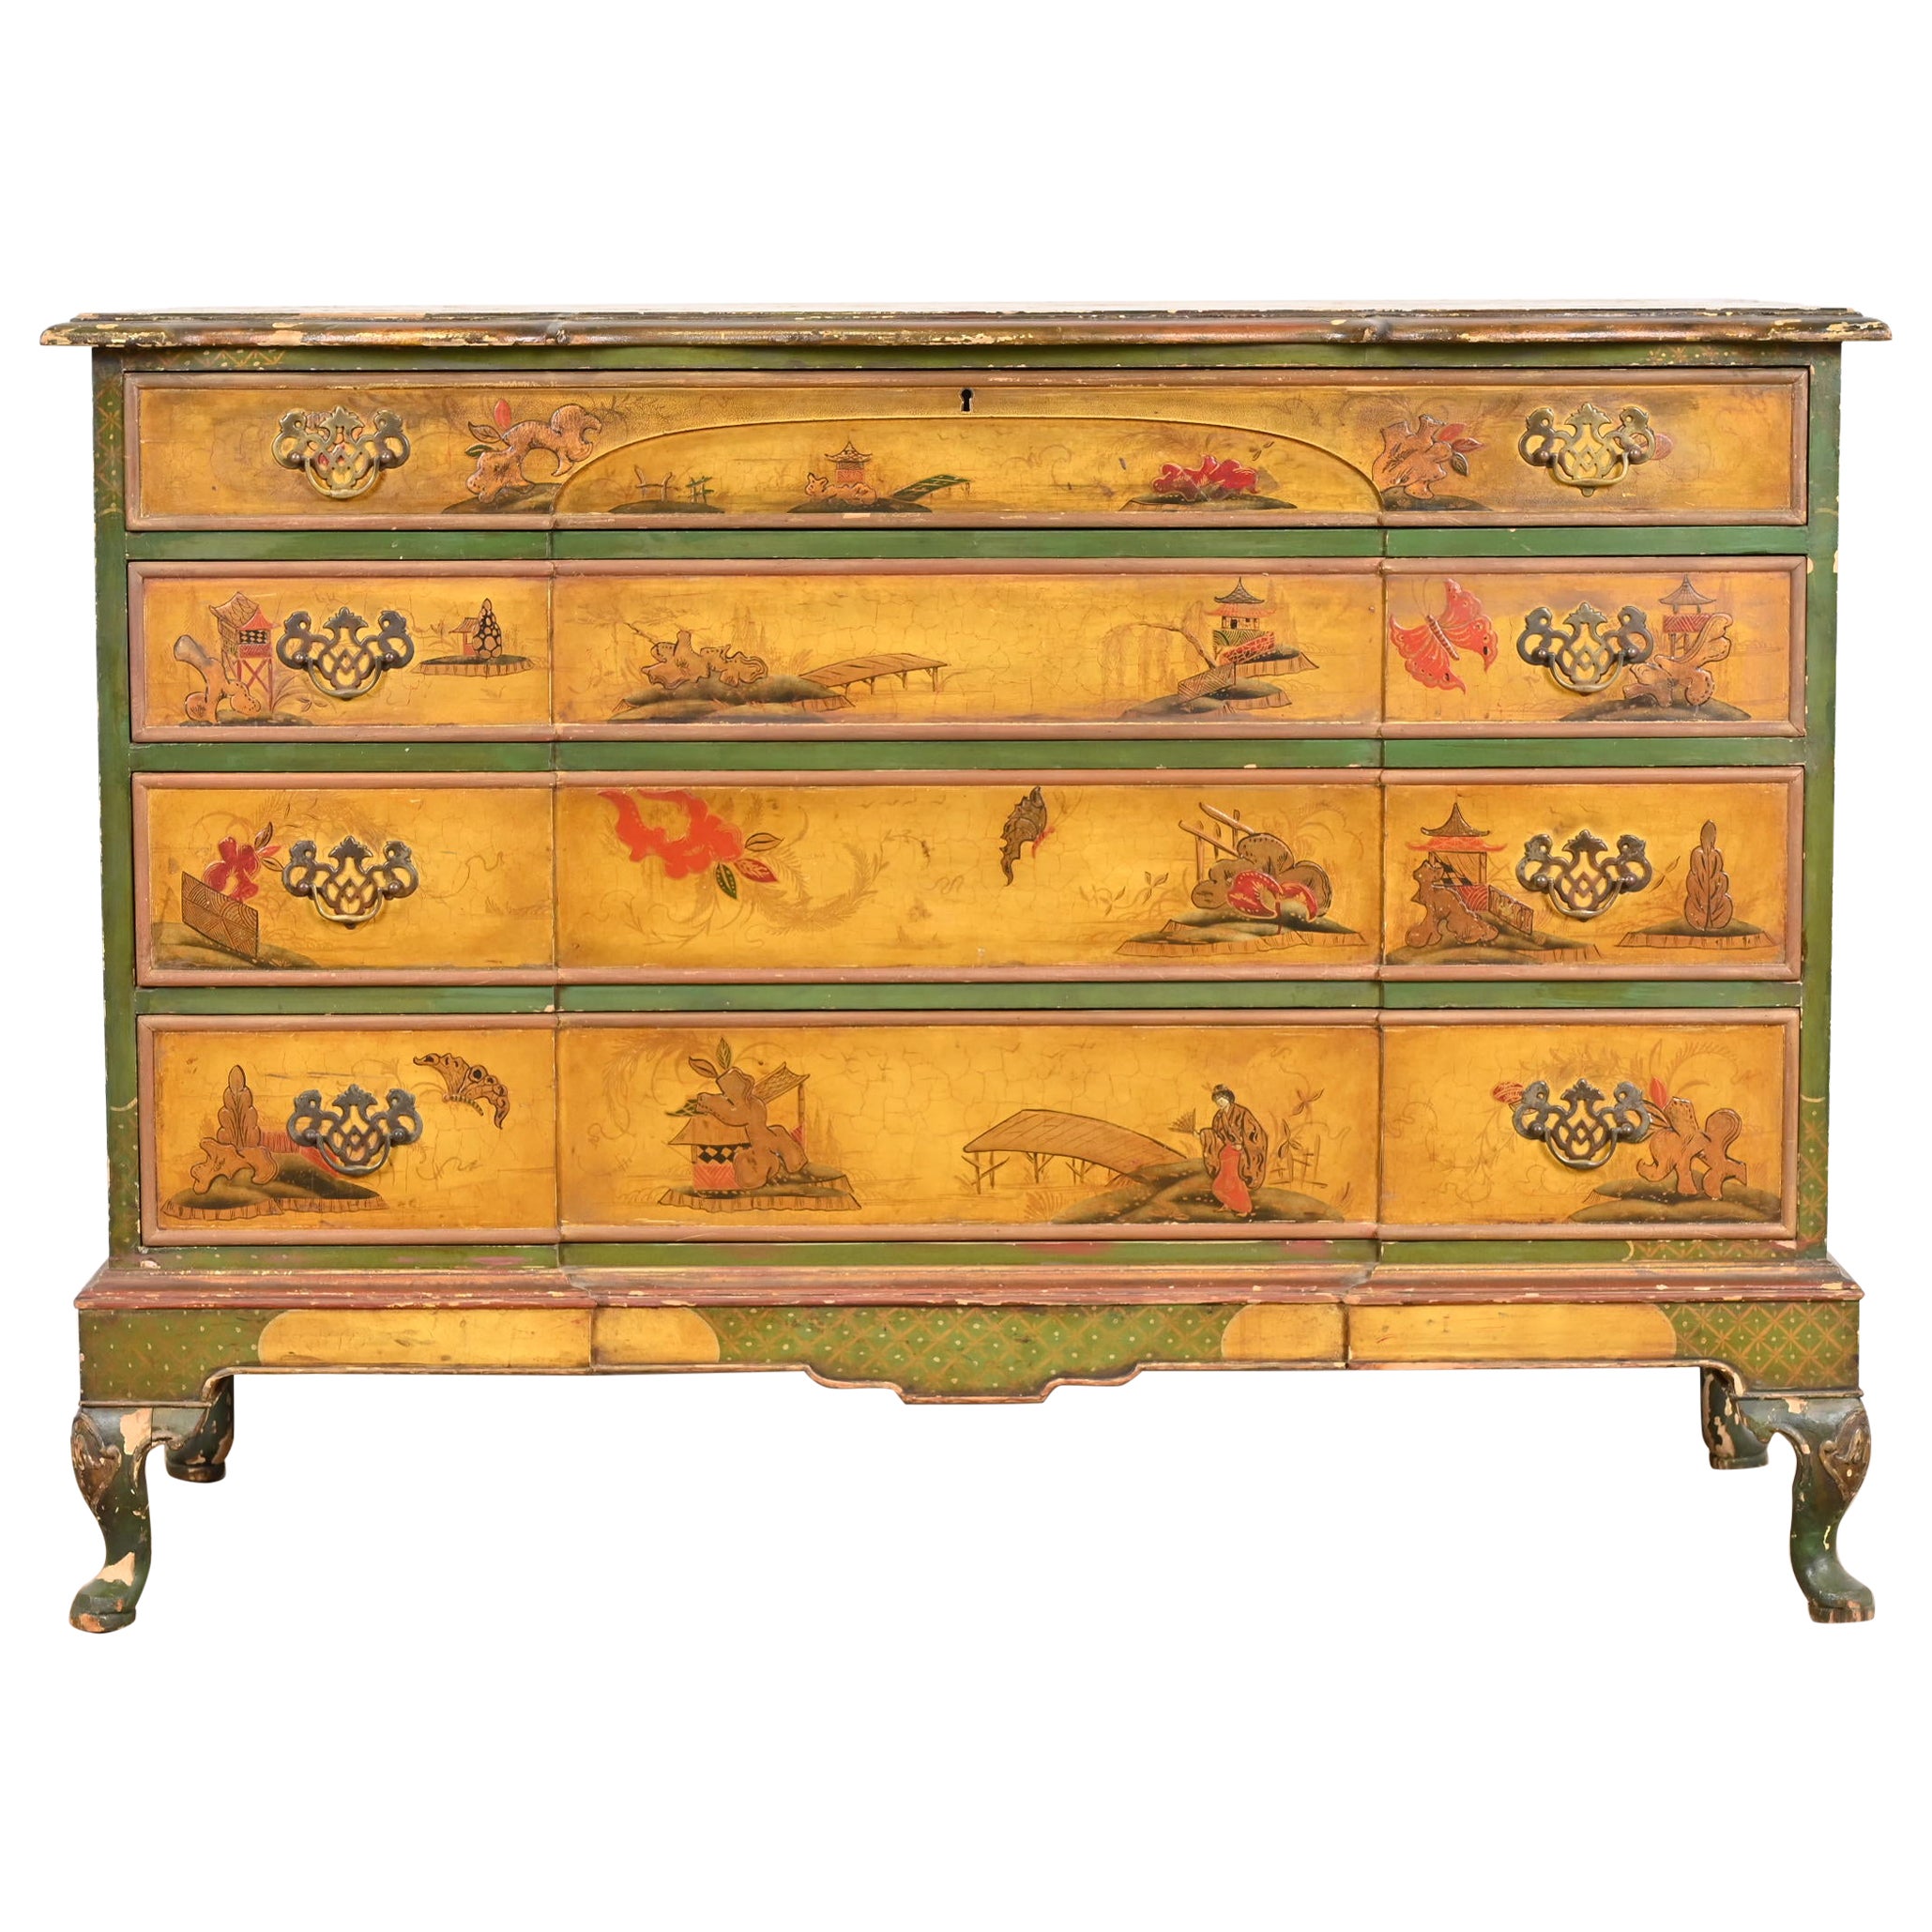 Antique Japanned Chinoiserie Queen Anne Bureau From Historic Edgecroft Mansion